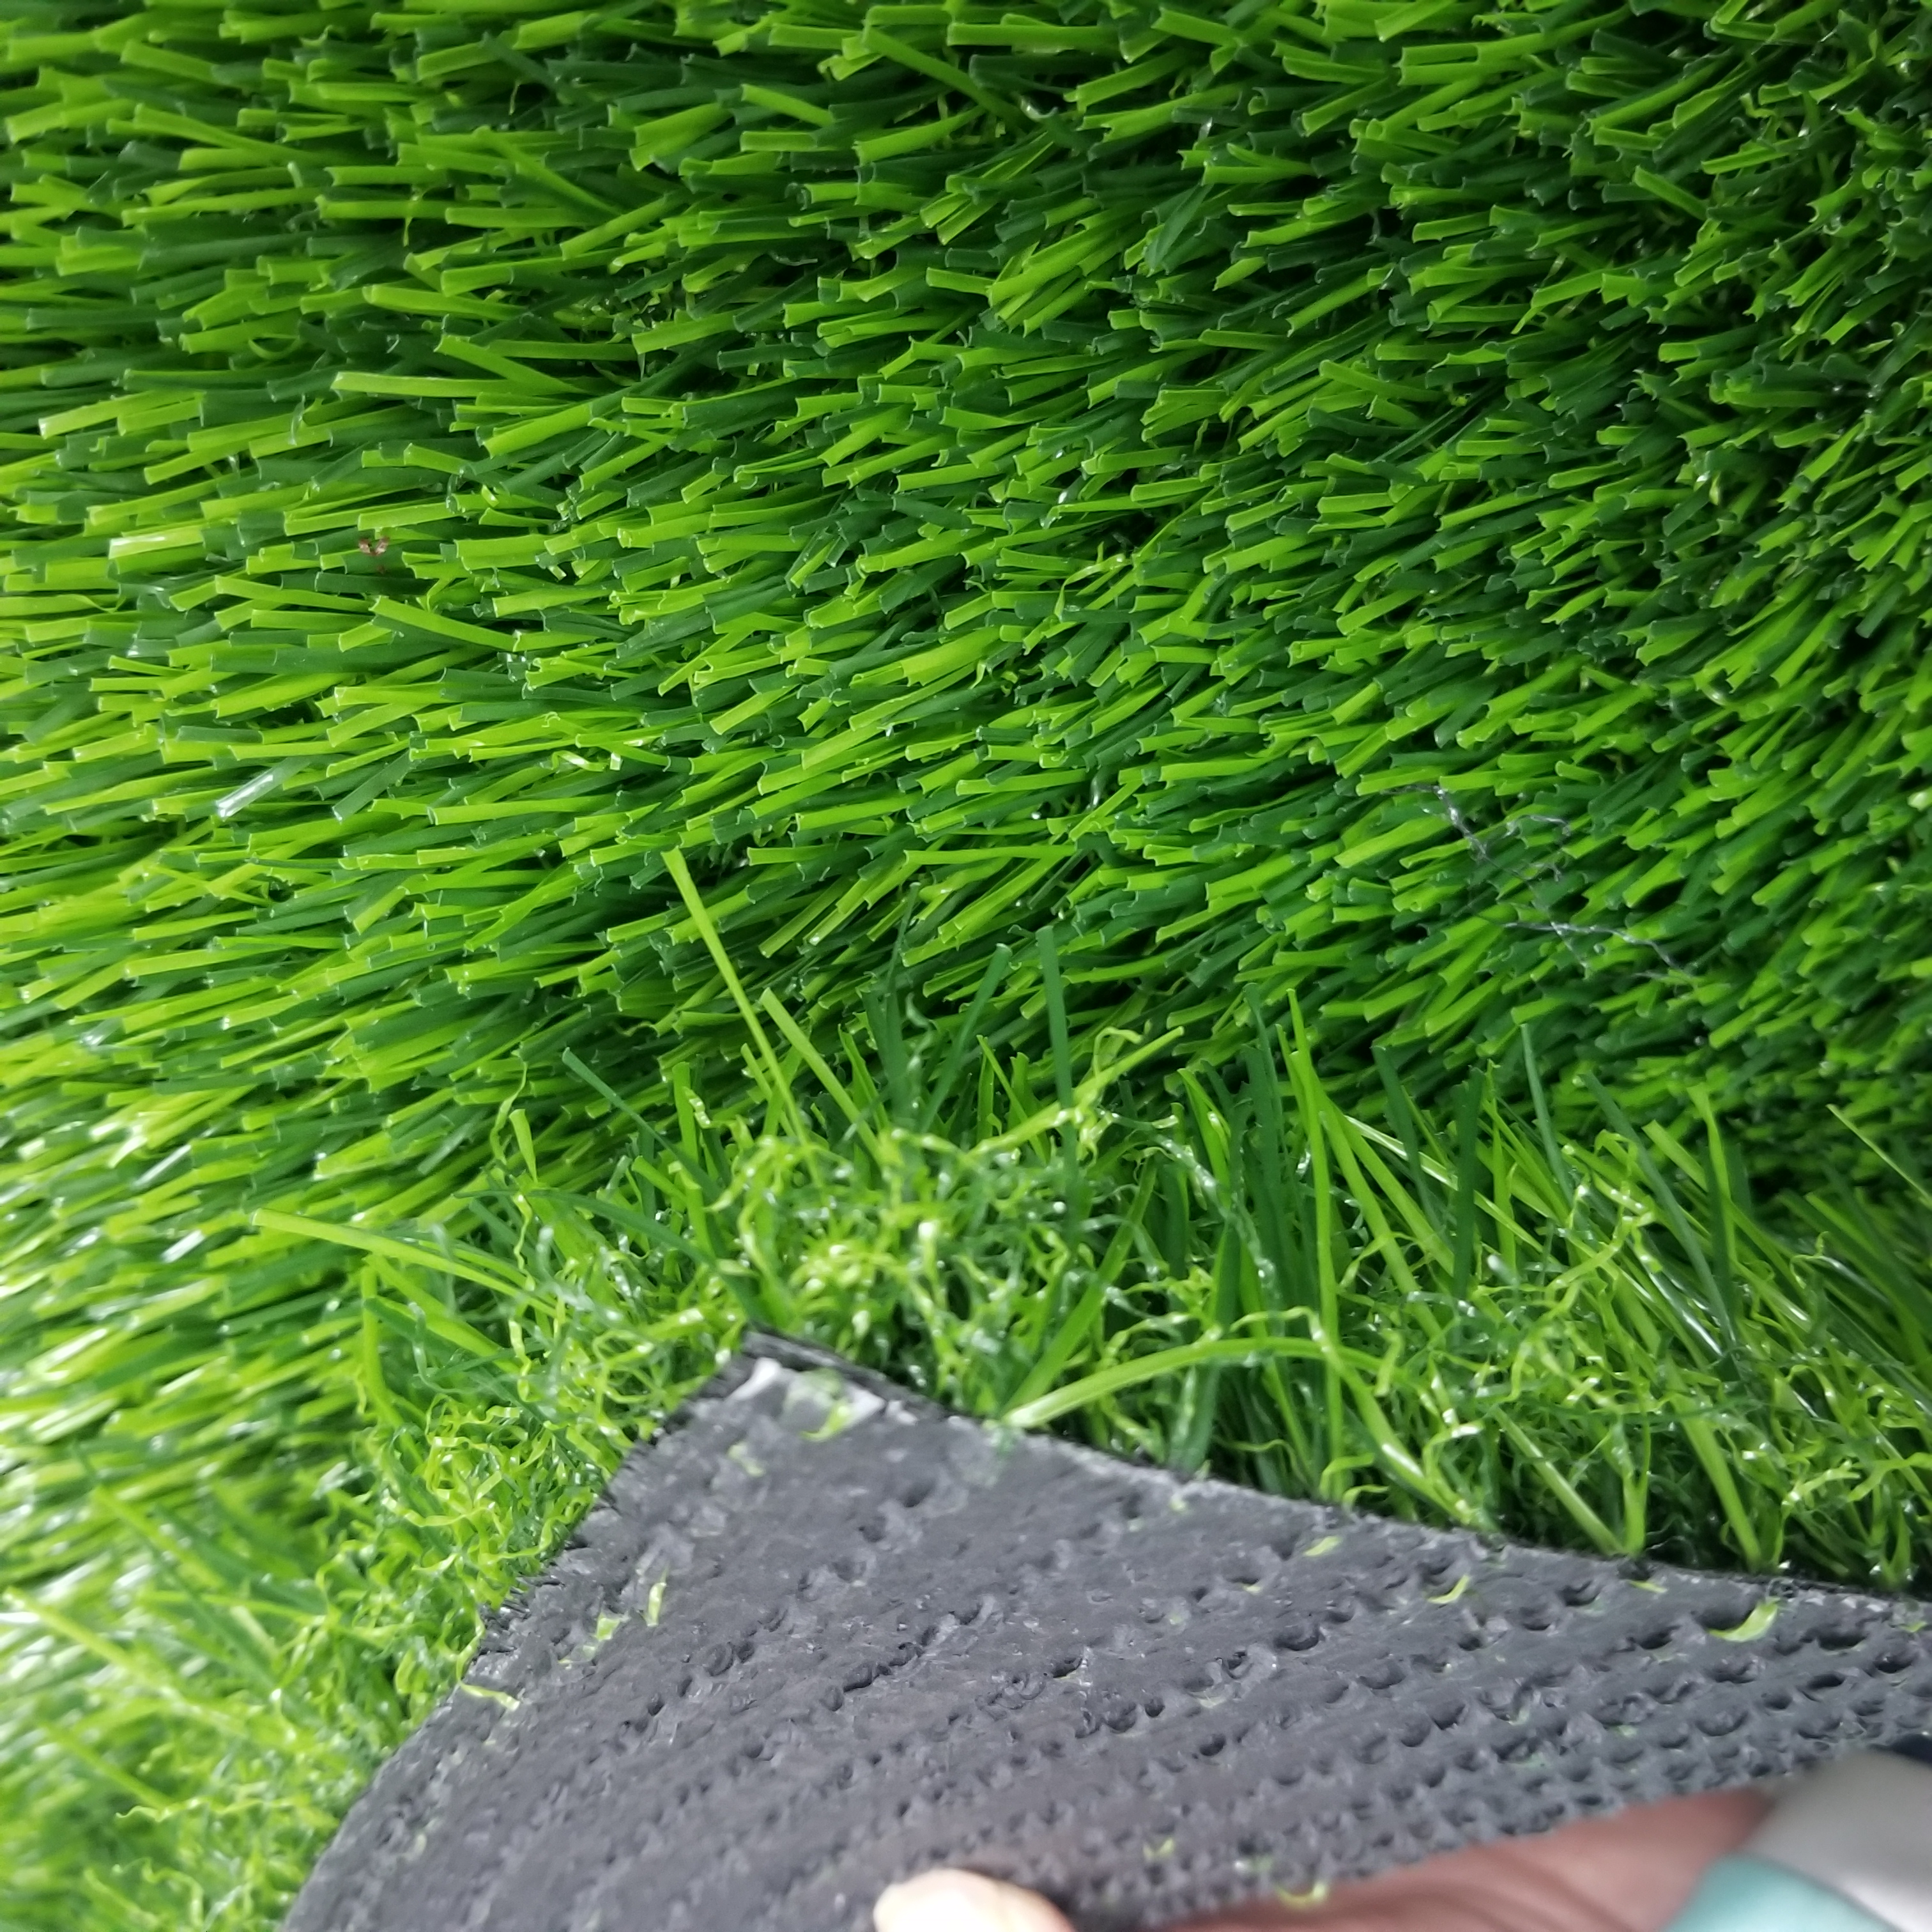 Wholesale China 6mm Grass Manufacturers Pricelist - Multicolor for Landscaping Forestgrass CE SGS Artificial Grass Hot Sale  – Jieyuanda